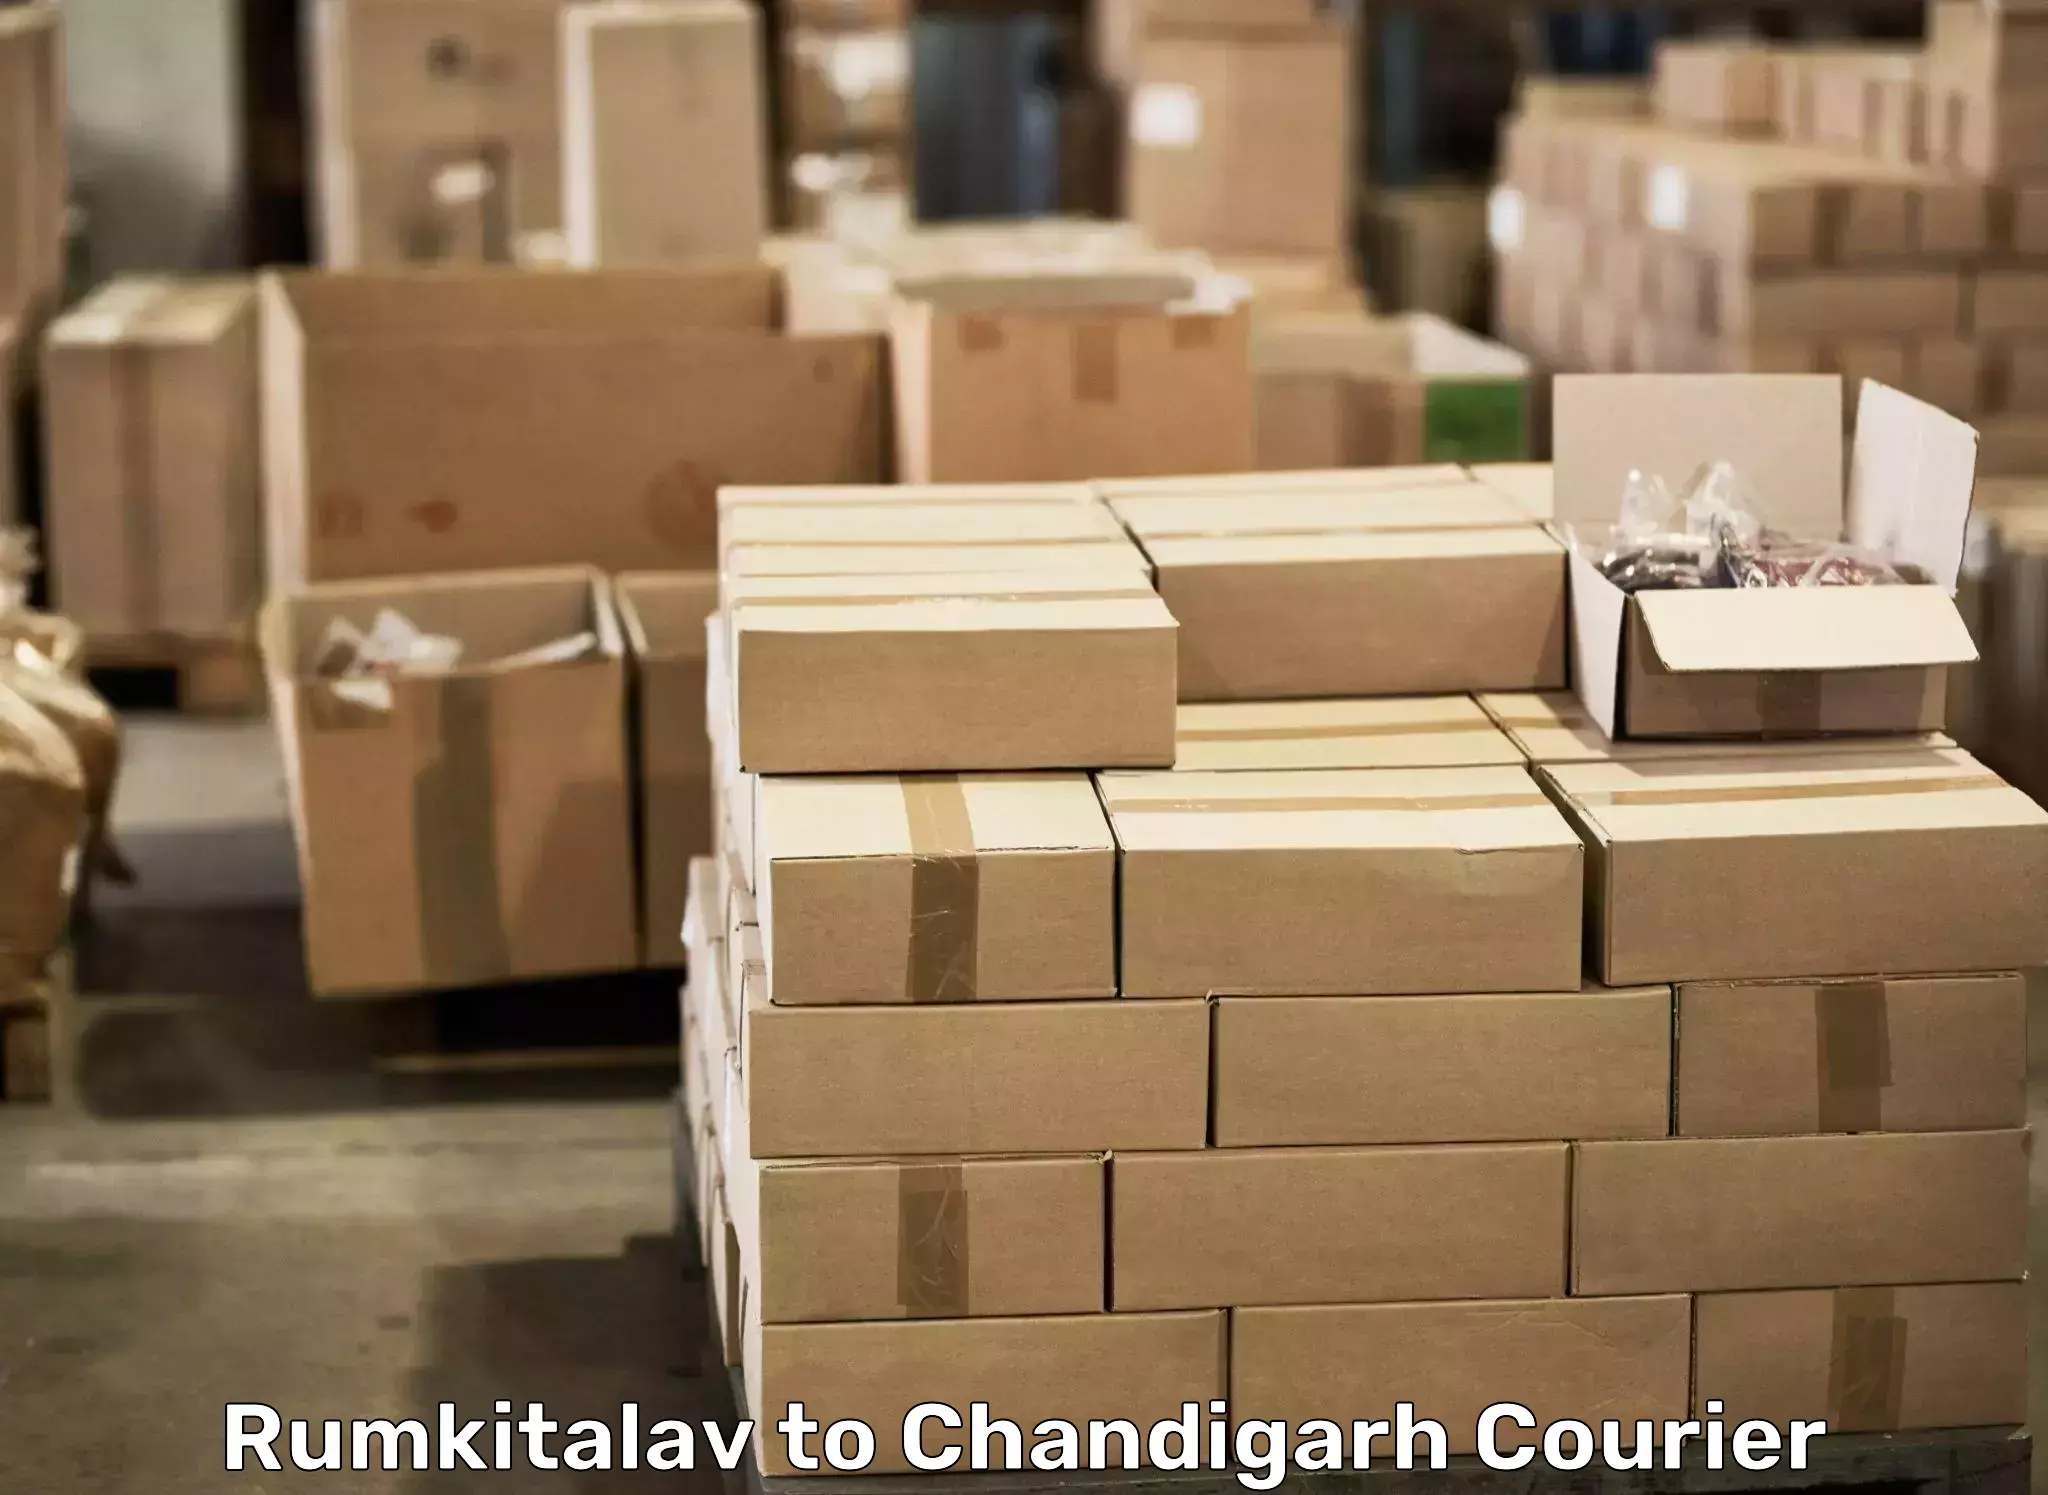 Quality moving services Rumkitalav to Chandigarh